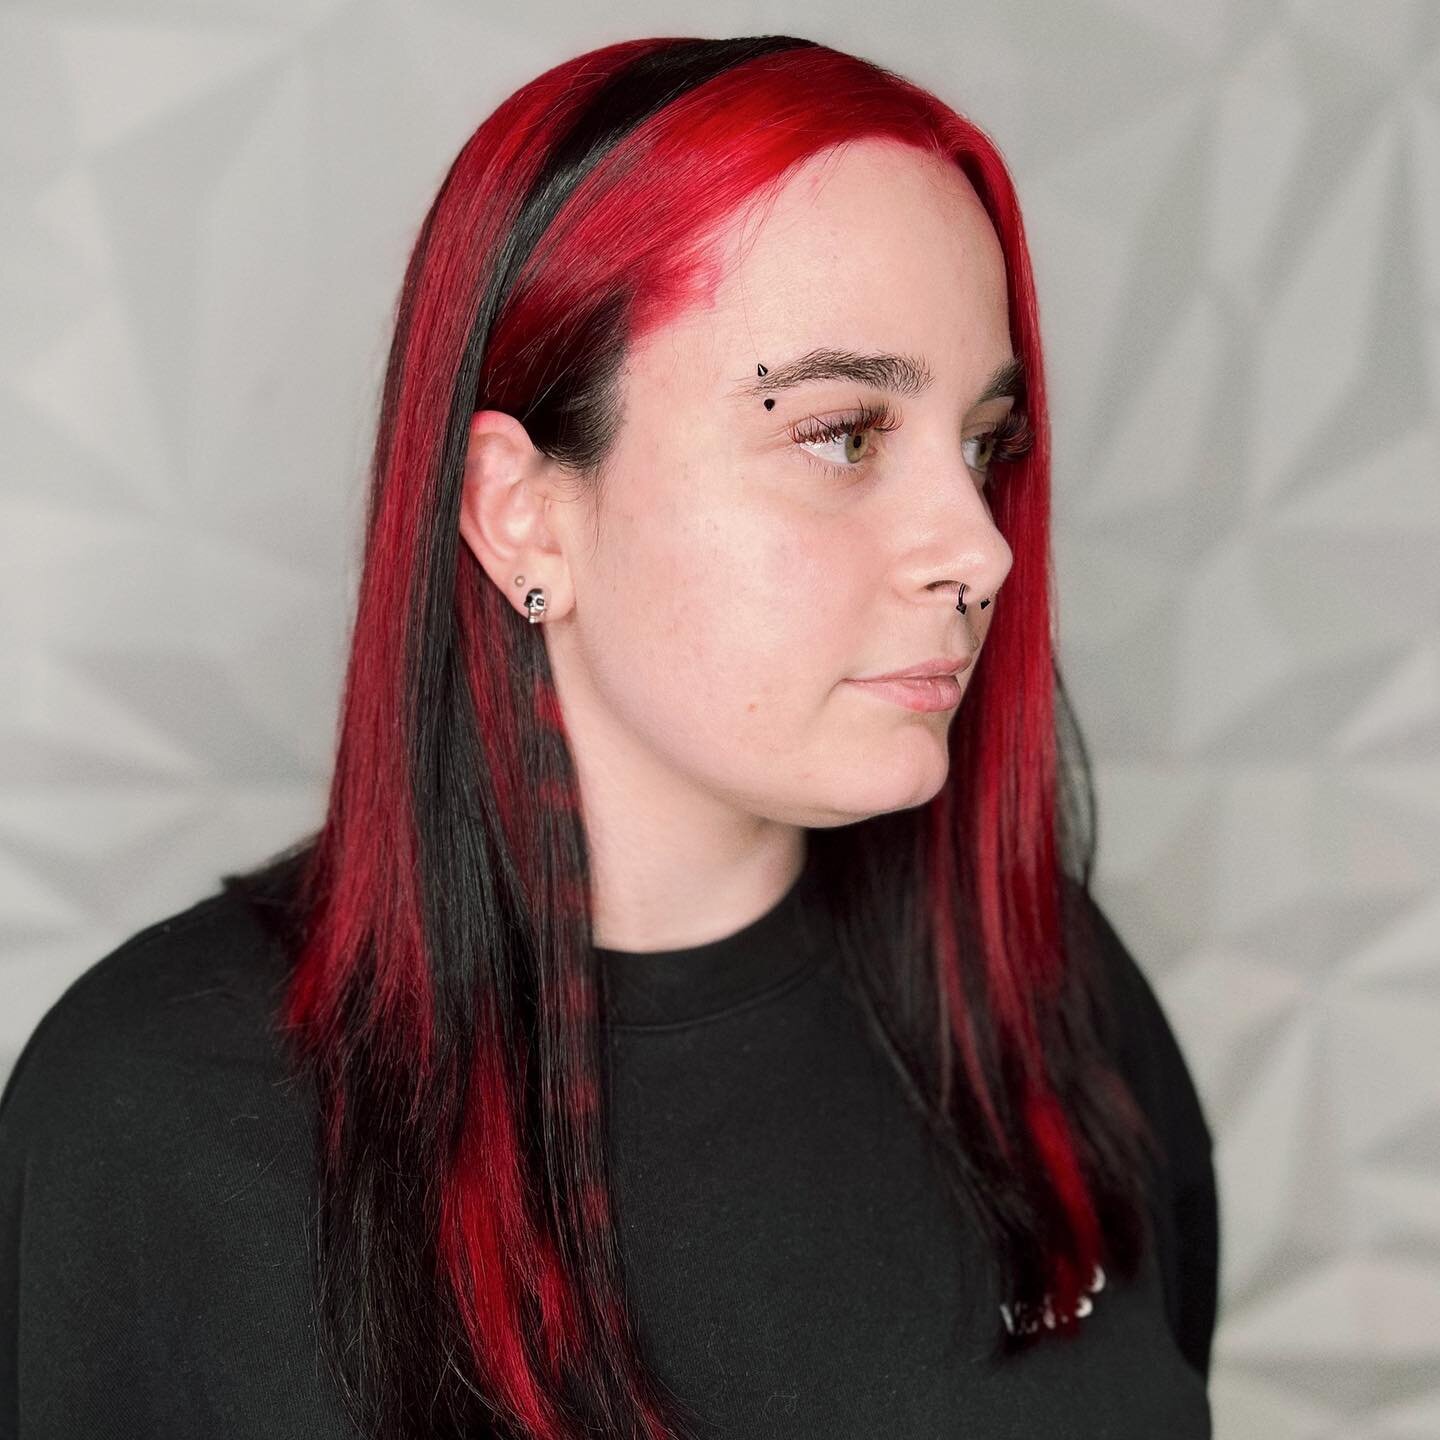 🖤❤️🖤❤️ We&rsquo;re loving this  red &amp; black refreshed look featuring hand painted striping. Swipe to see the before. Done by our stylist Alyssa. 
.
.
.
#pulpriot #pulpriothair #redandblackhair #redhair #blackhair #fashioncolor #fantasycolor #pu